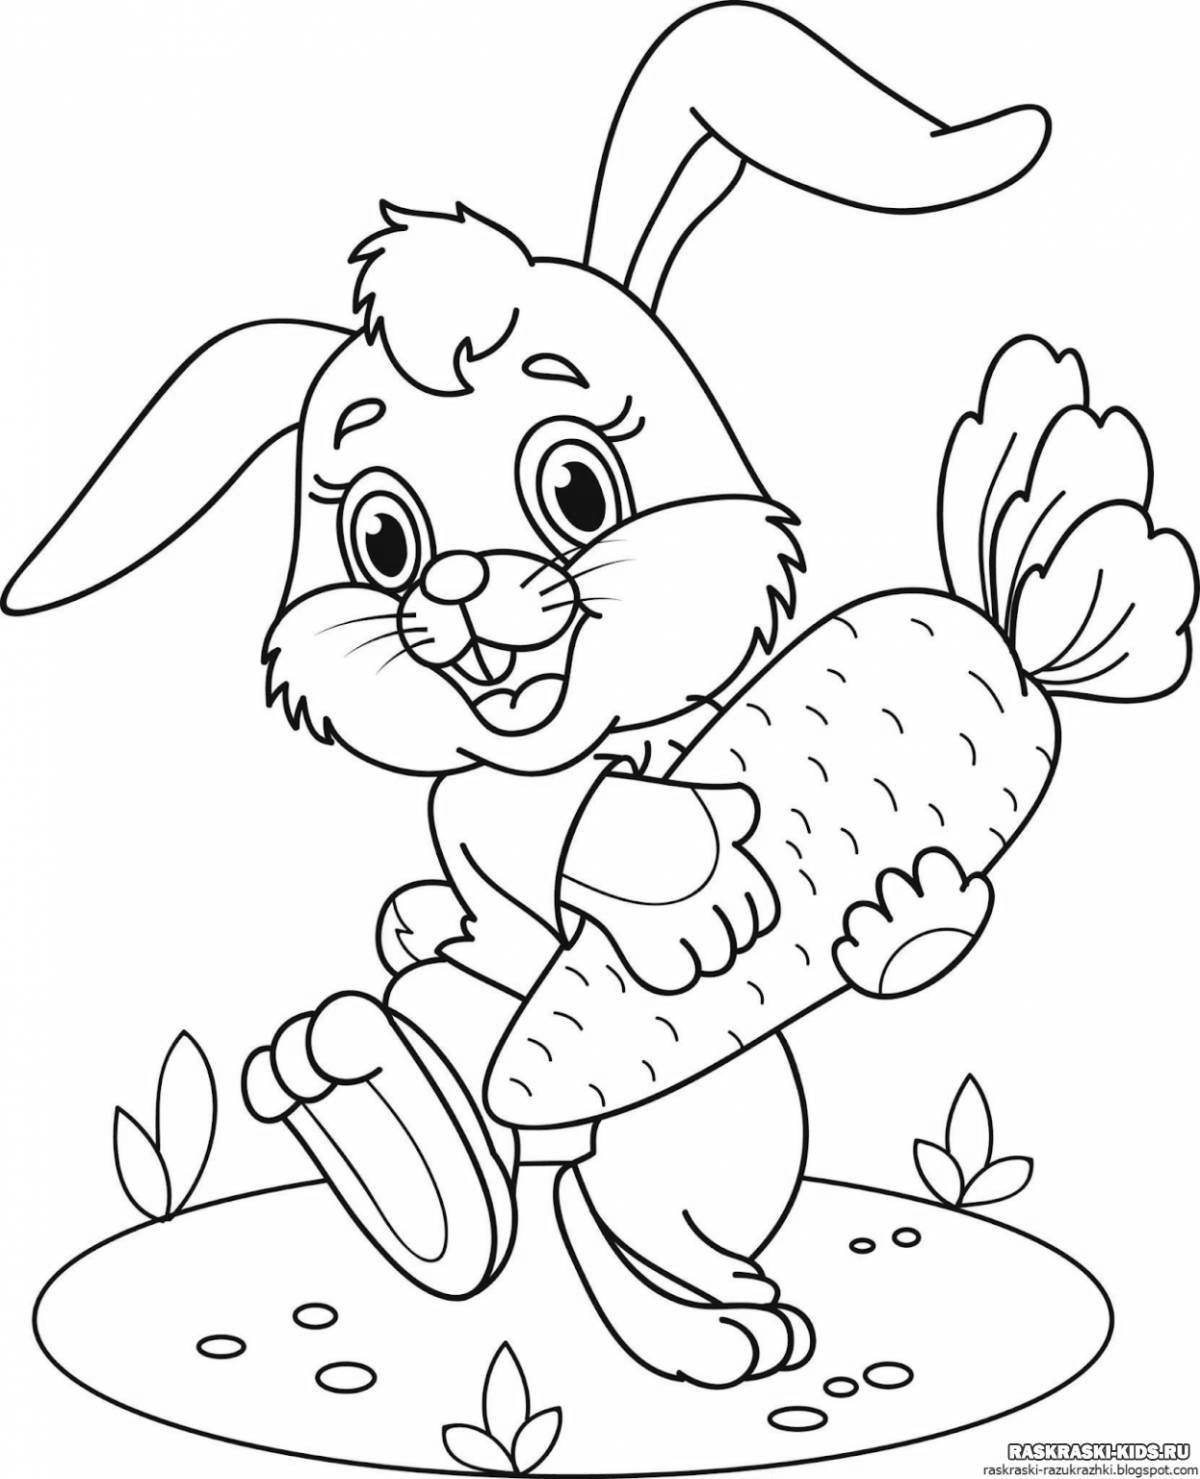 Fluffy bunny coloring book for kids 3 4